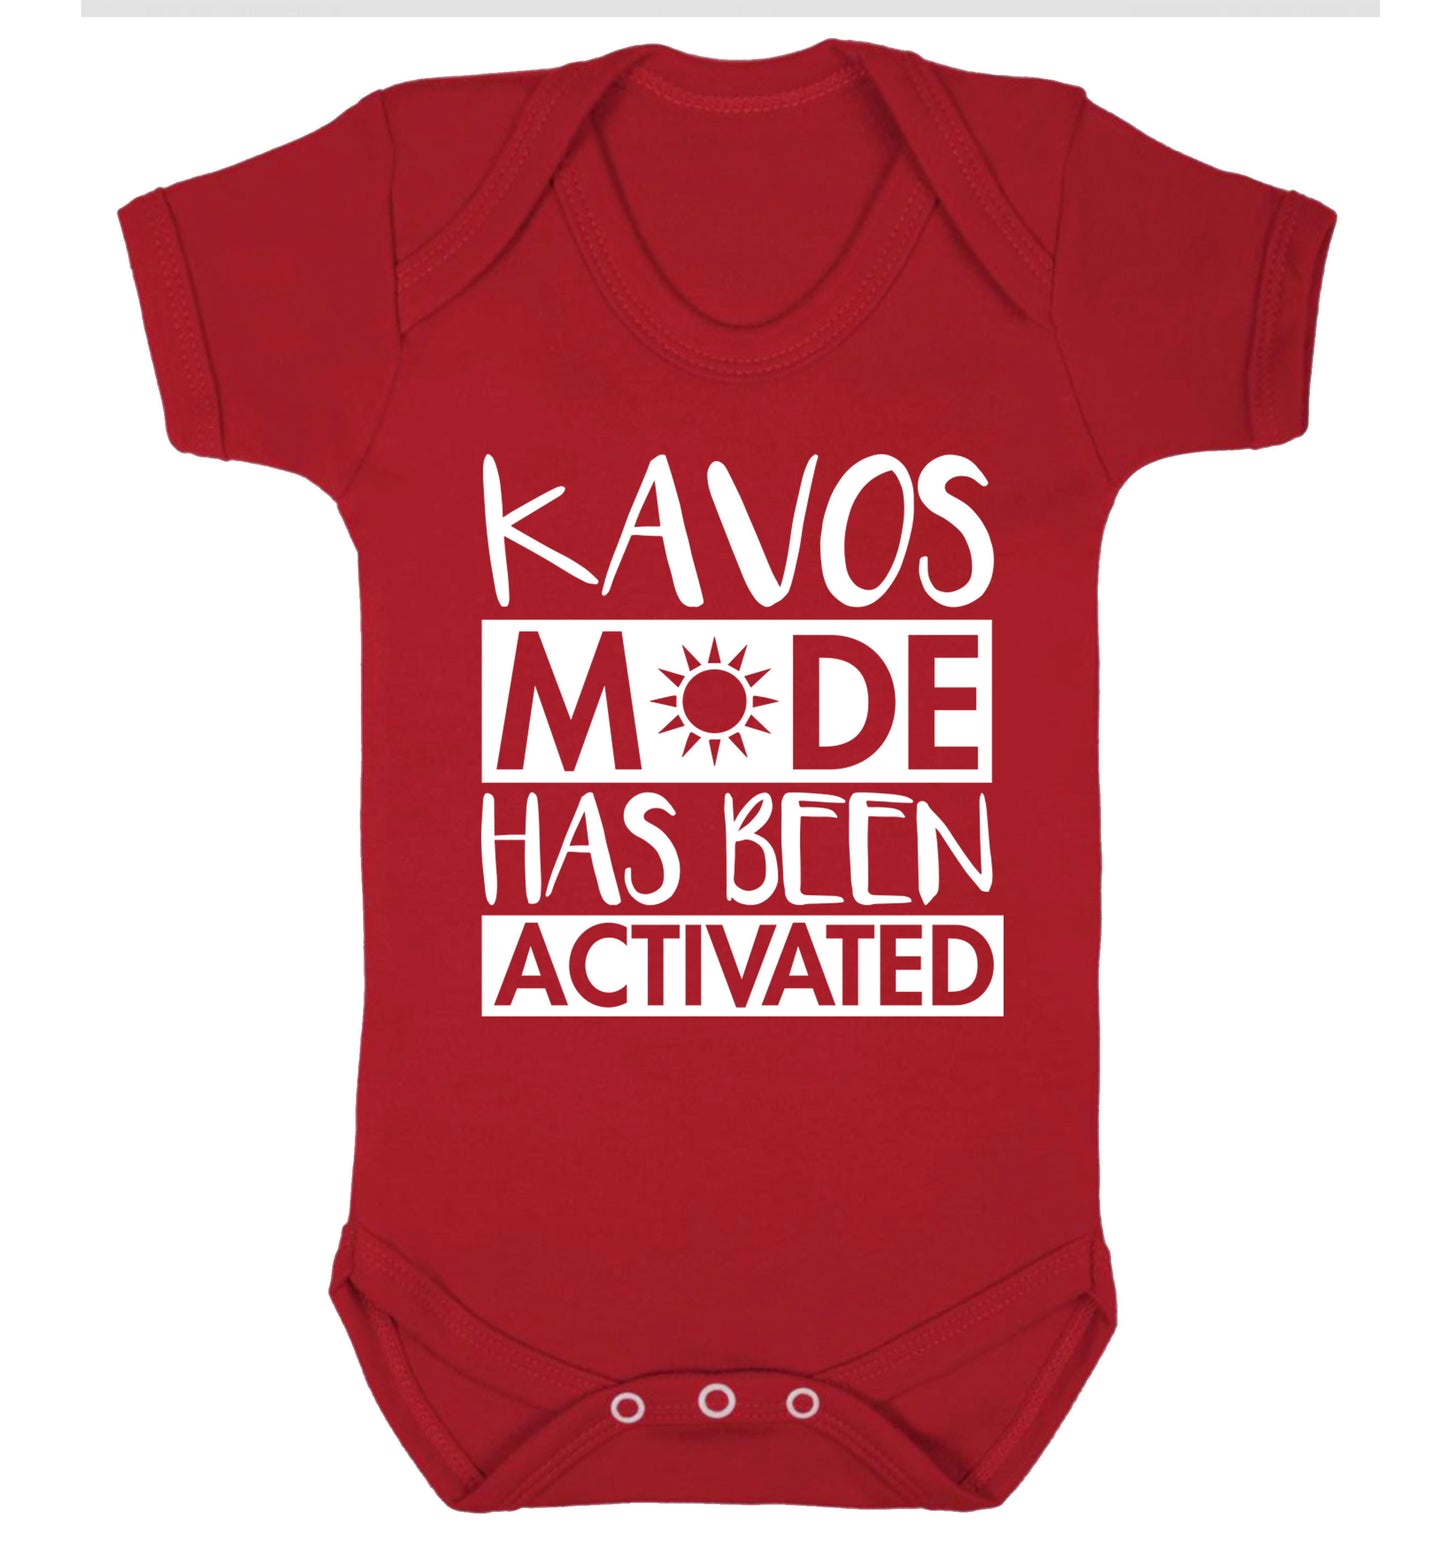 Kavos mode has been activated Baby Vest red 18-24 months